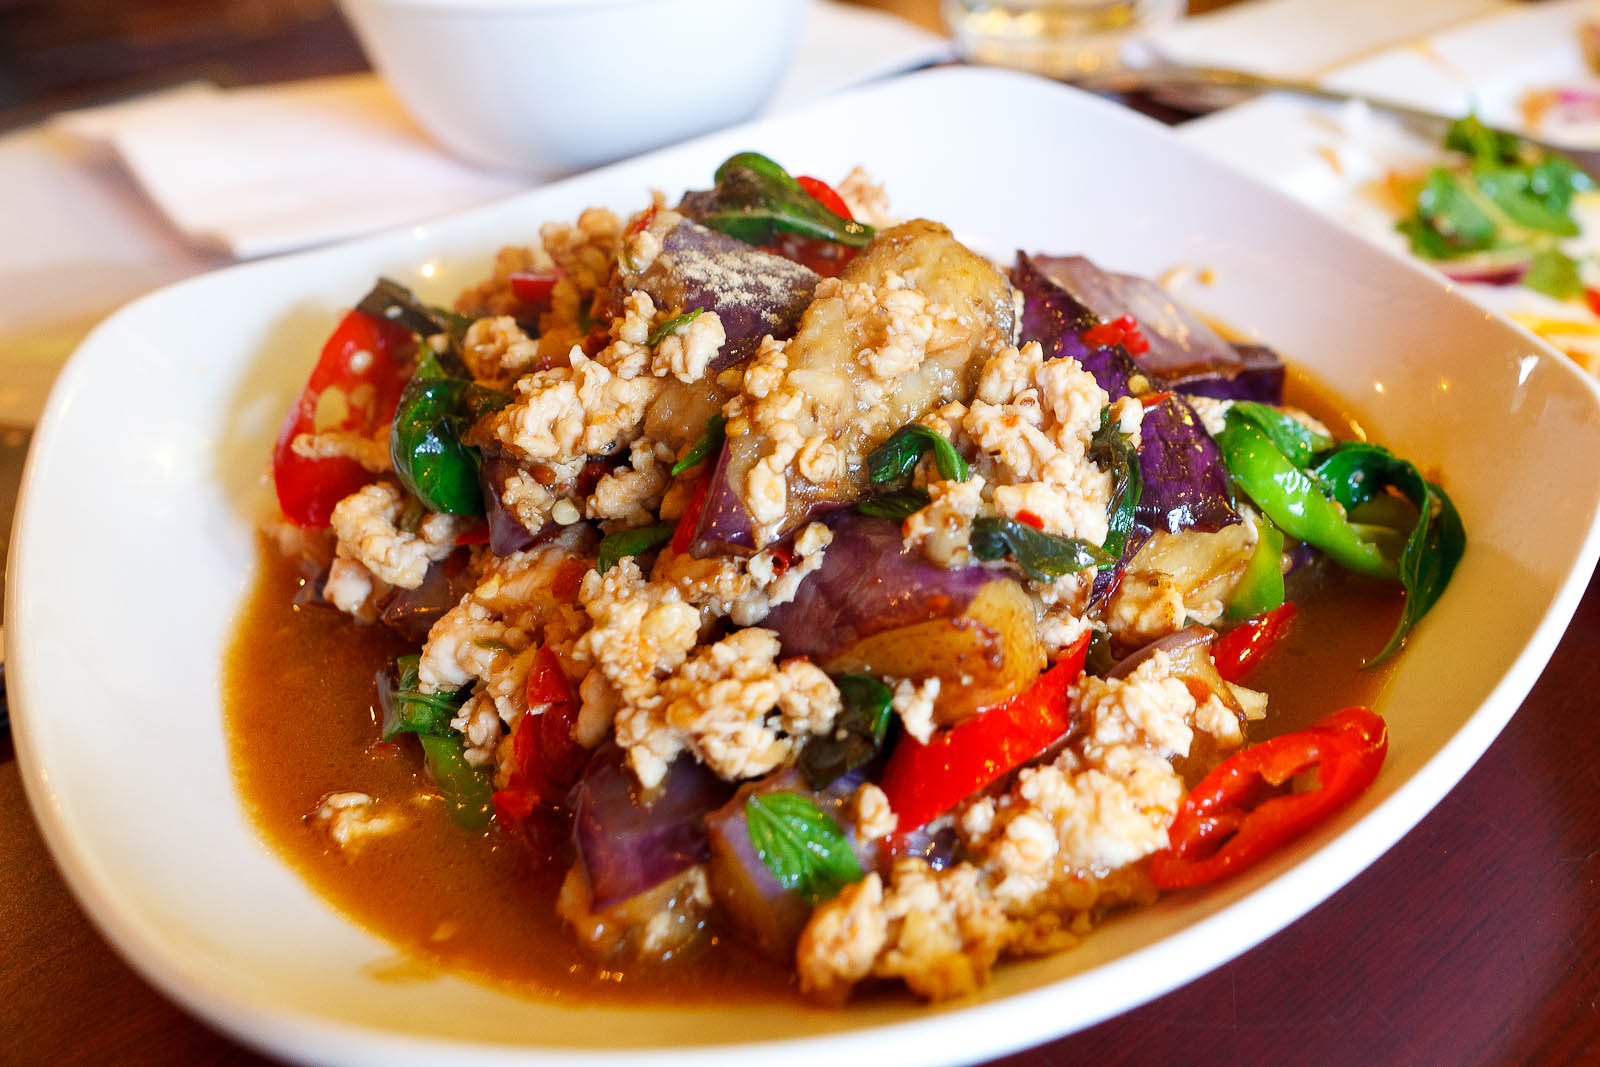 Sauteed eggplant with ground chicken, garlic, chili, and basil leaves ($9)